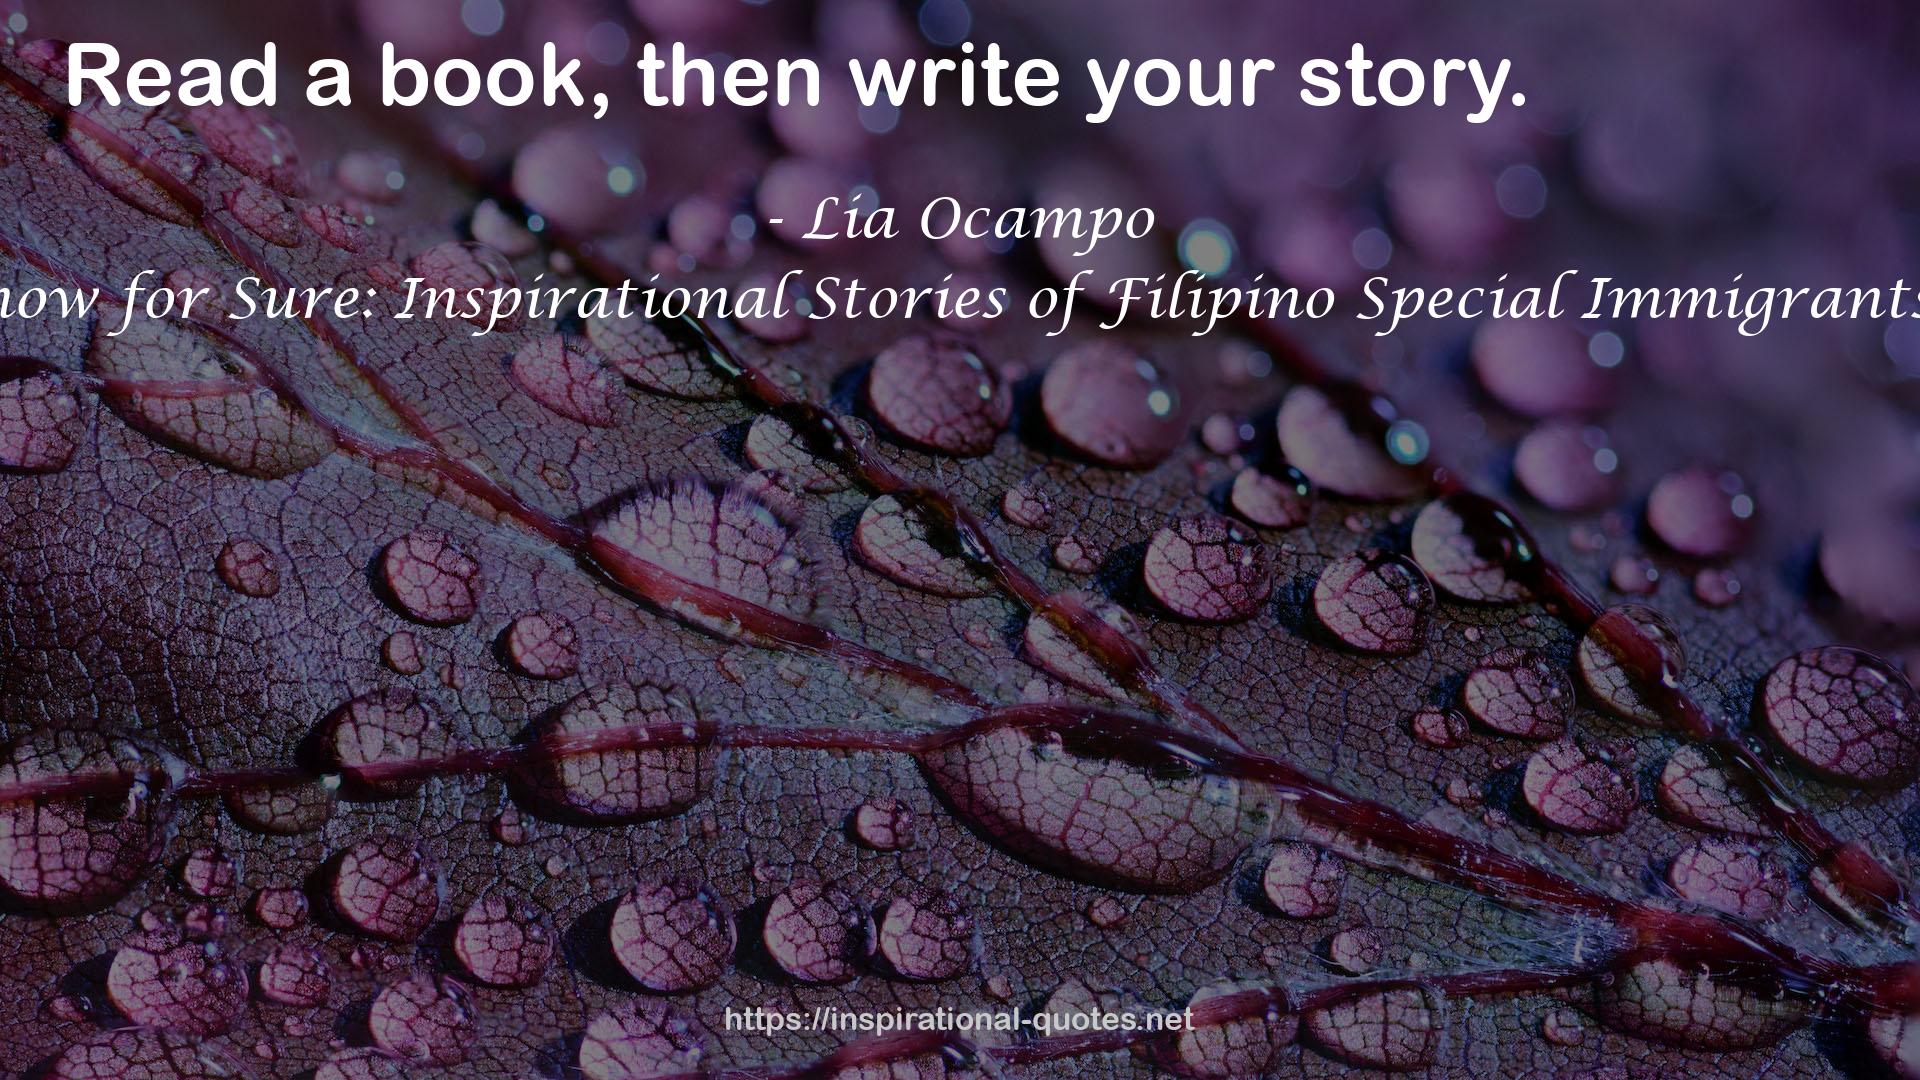 What We Know for Sure: Inspirational Stories of Filipino Special Immigrants in America QUOTES